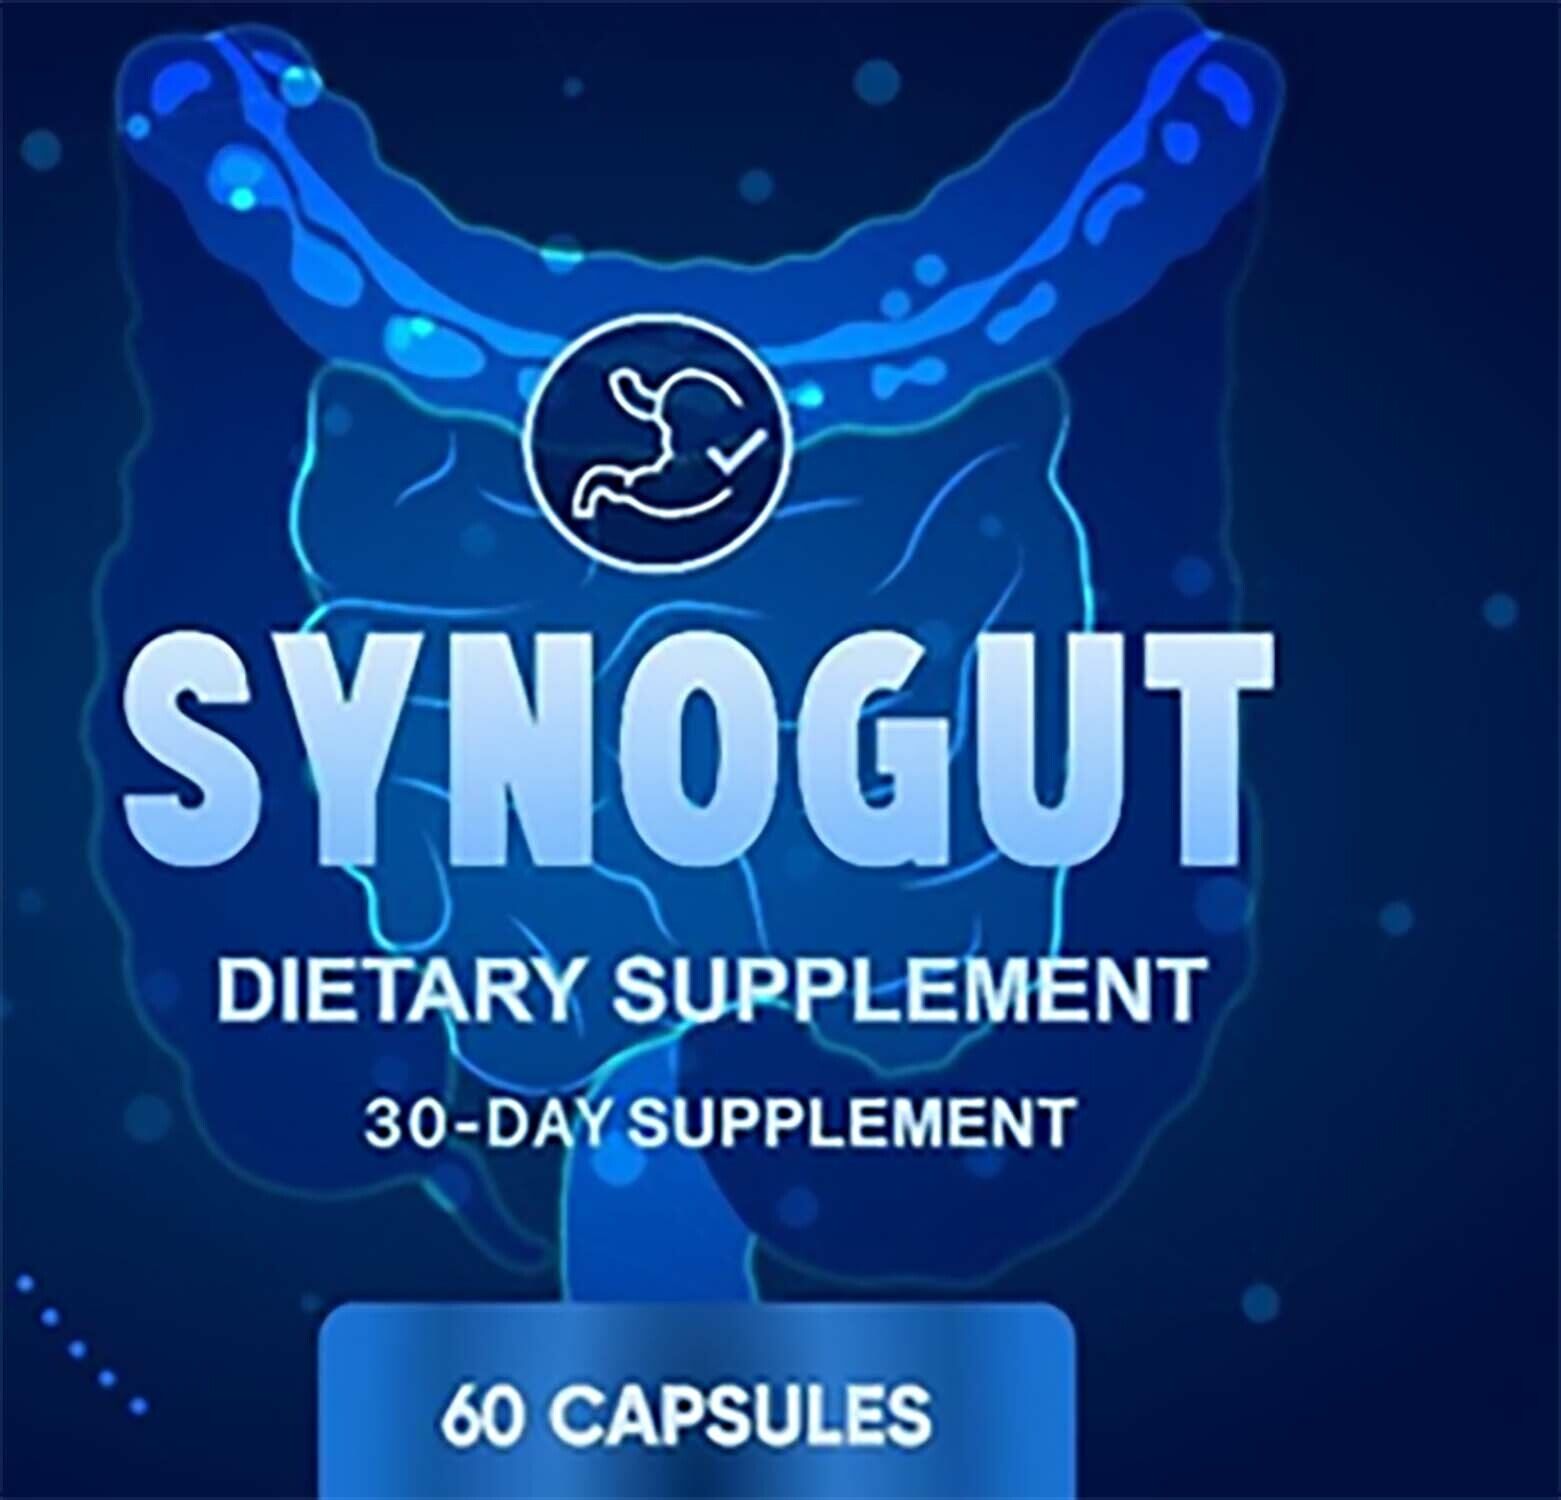 does synogut really work